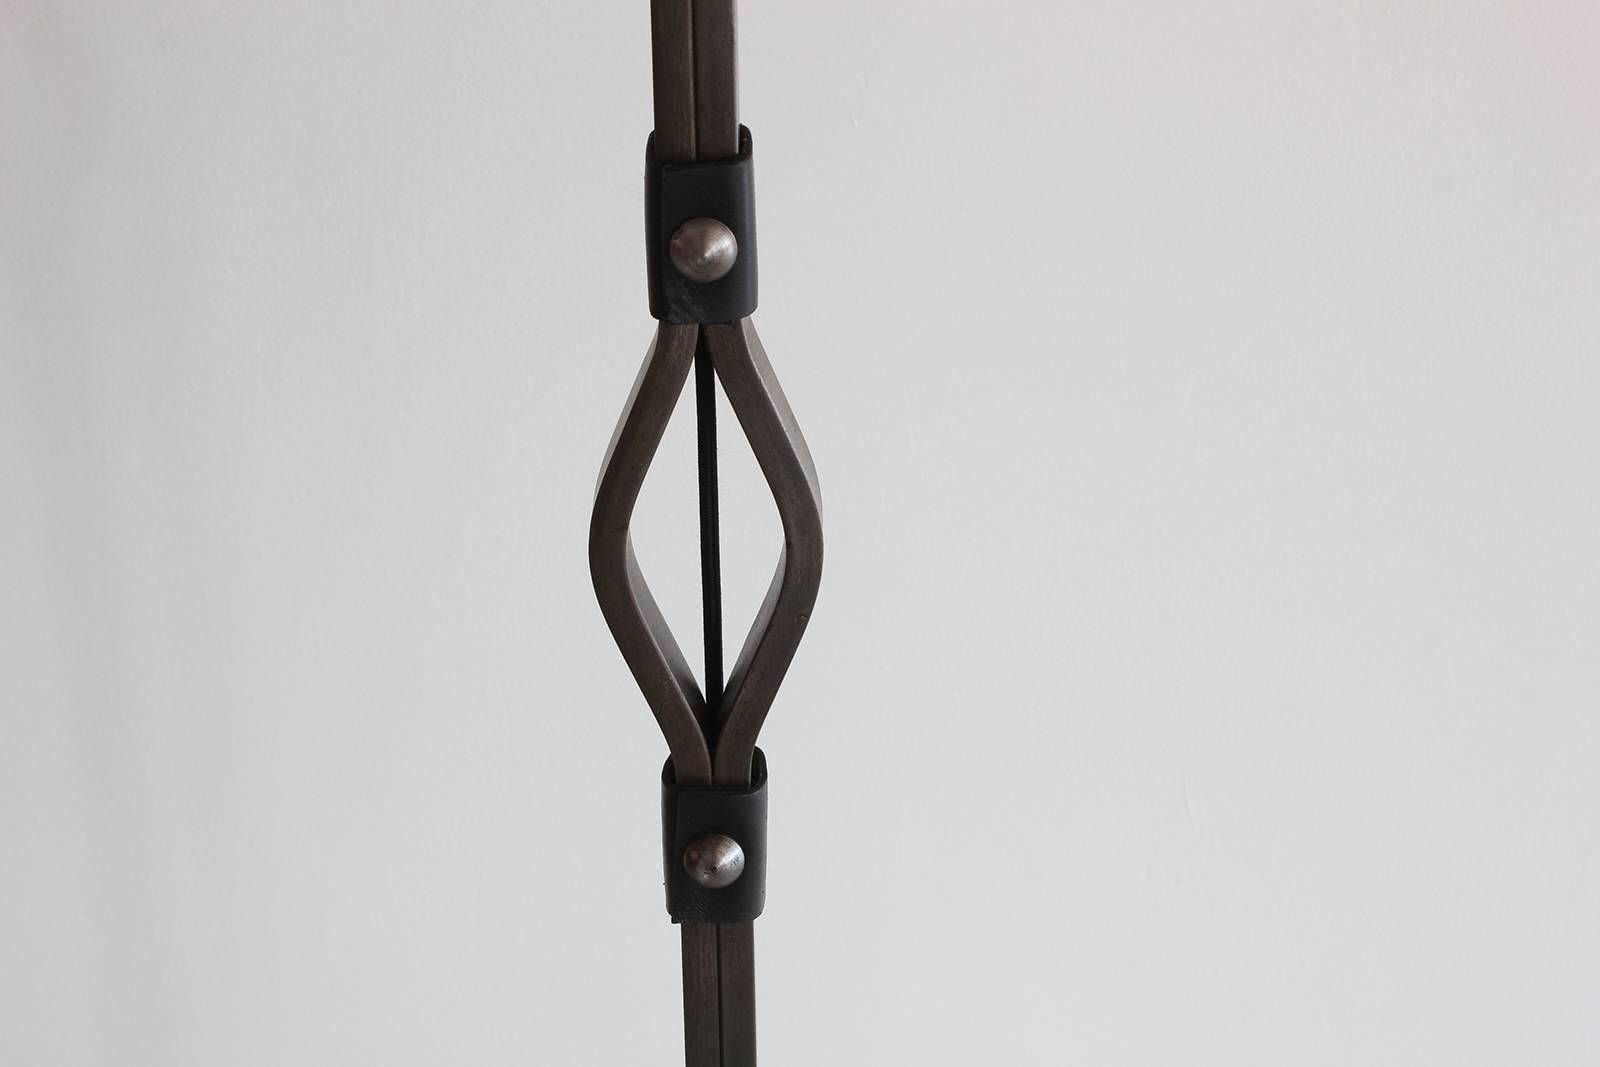 Fantastic iron and leather floor lamp by Jacques Adnet. Horseshoe shaped iron base with new saddle leather detailing throughout. Great patina to original materials. Newly rewired with new linen shade.